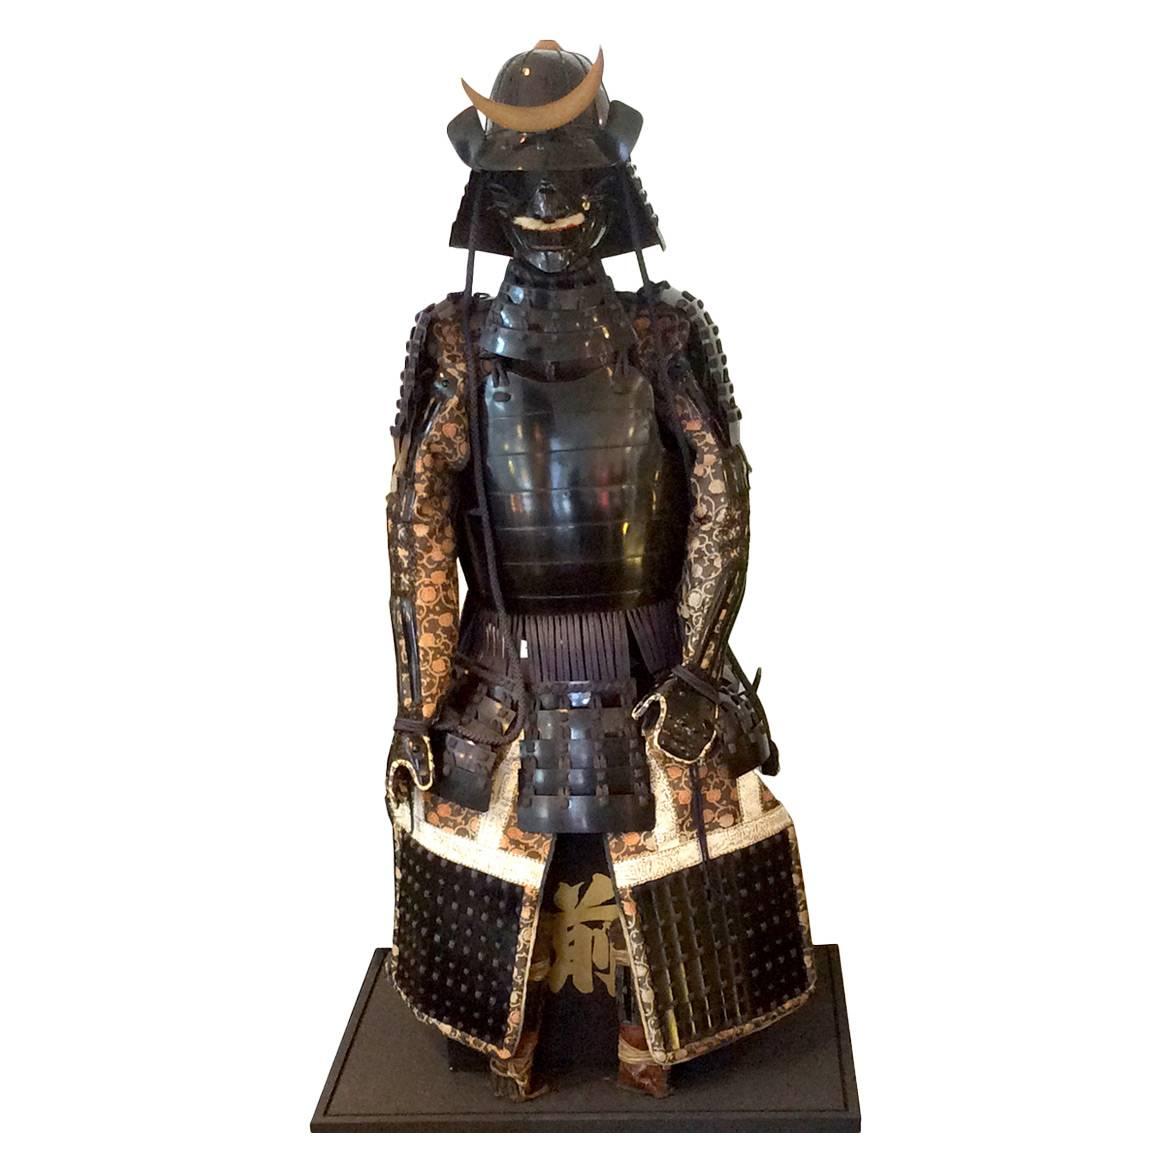 Samurai Armor Under a Glass Box with LED Lighting. Sold